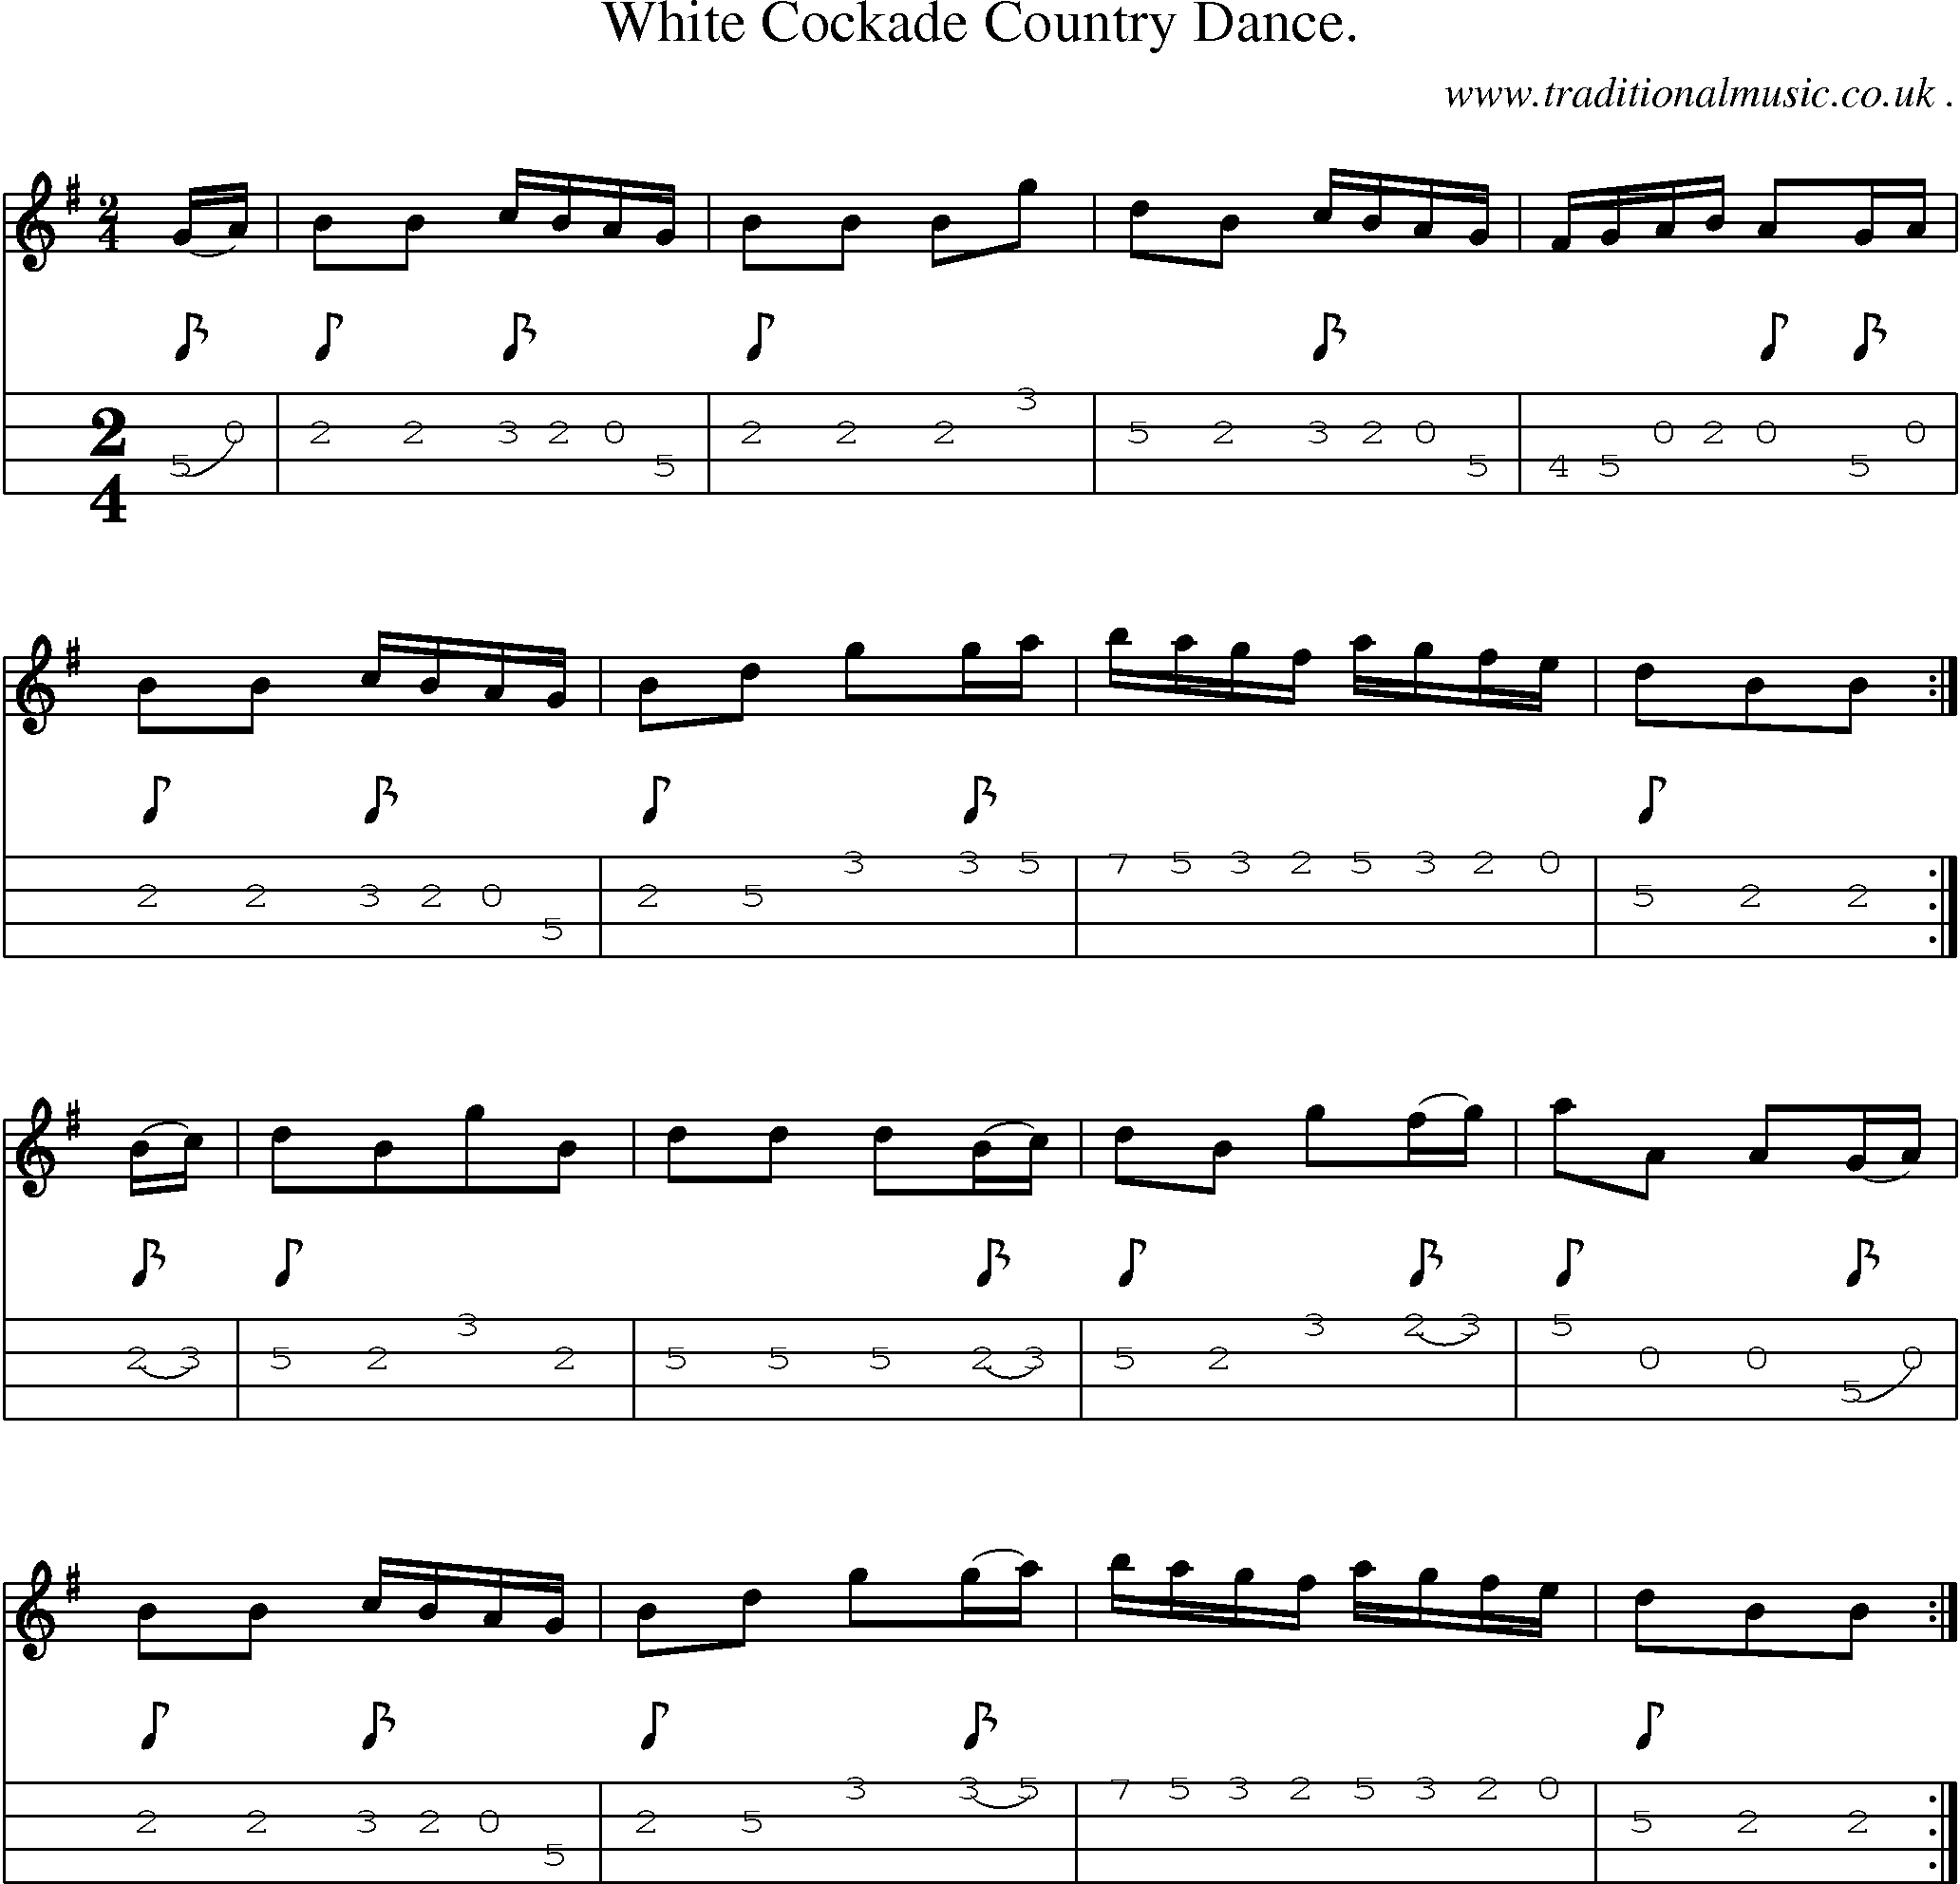 Sheet-Music and Mandolin Tabs for White Cockade Country Dance